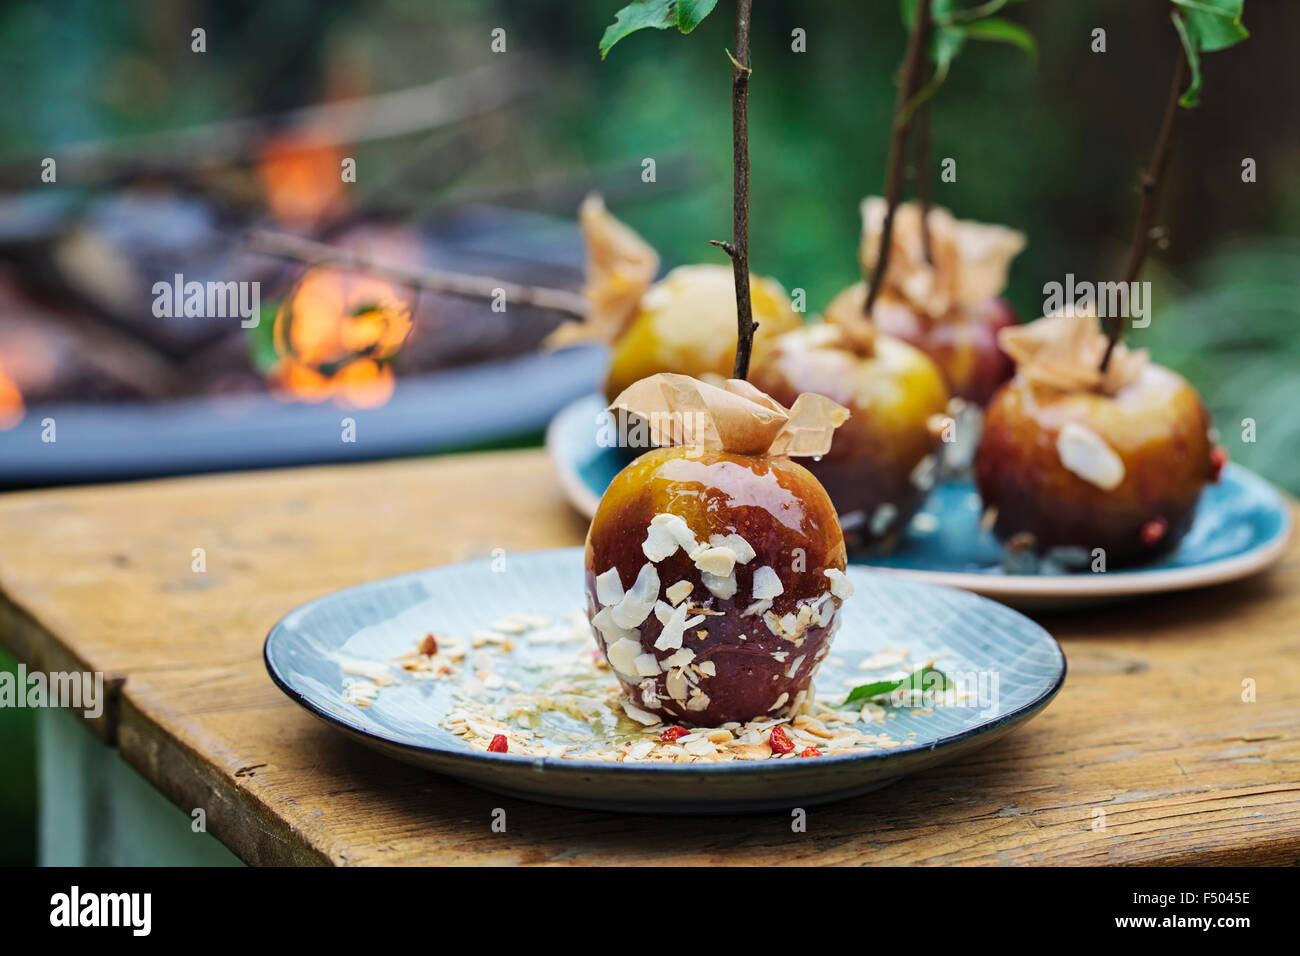 Toffee apples and a bonfire in the background Stock Photo